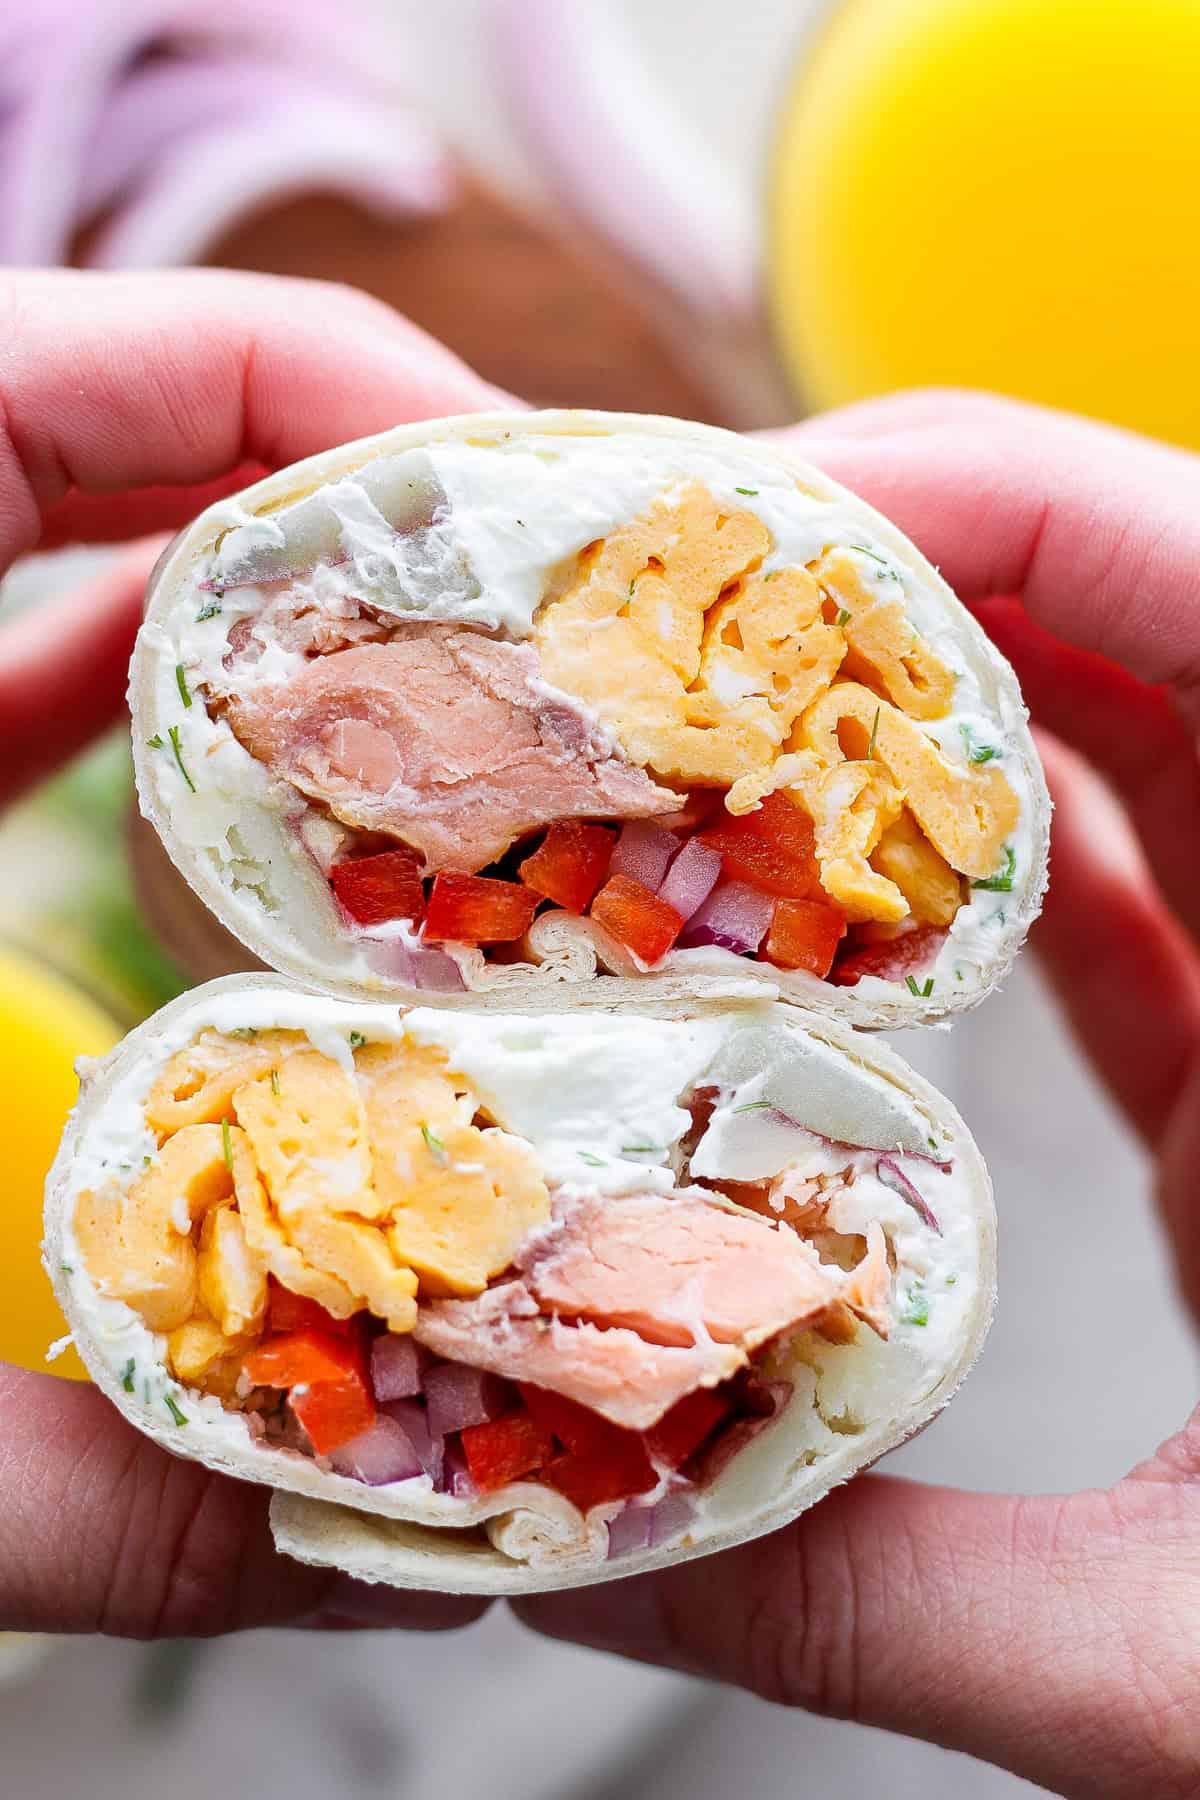 Close-up of a hand holding a halved wrap filled with salmon, cream cheese, diced vegetables, and scrambled eggs.